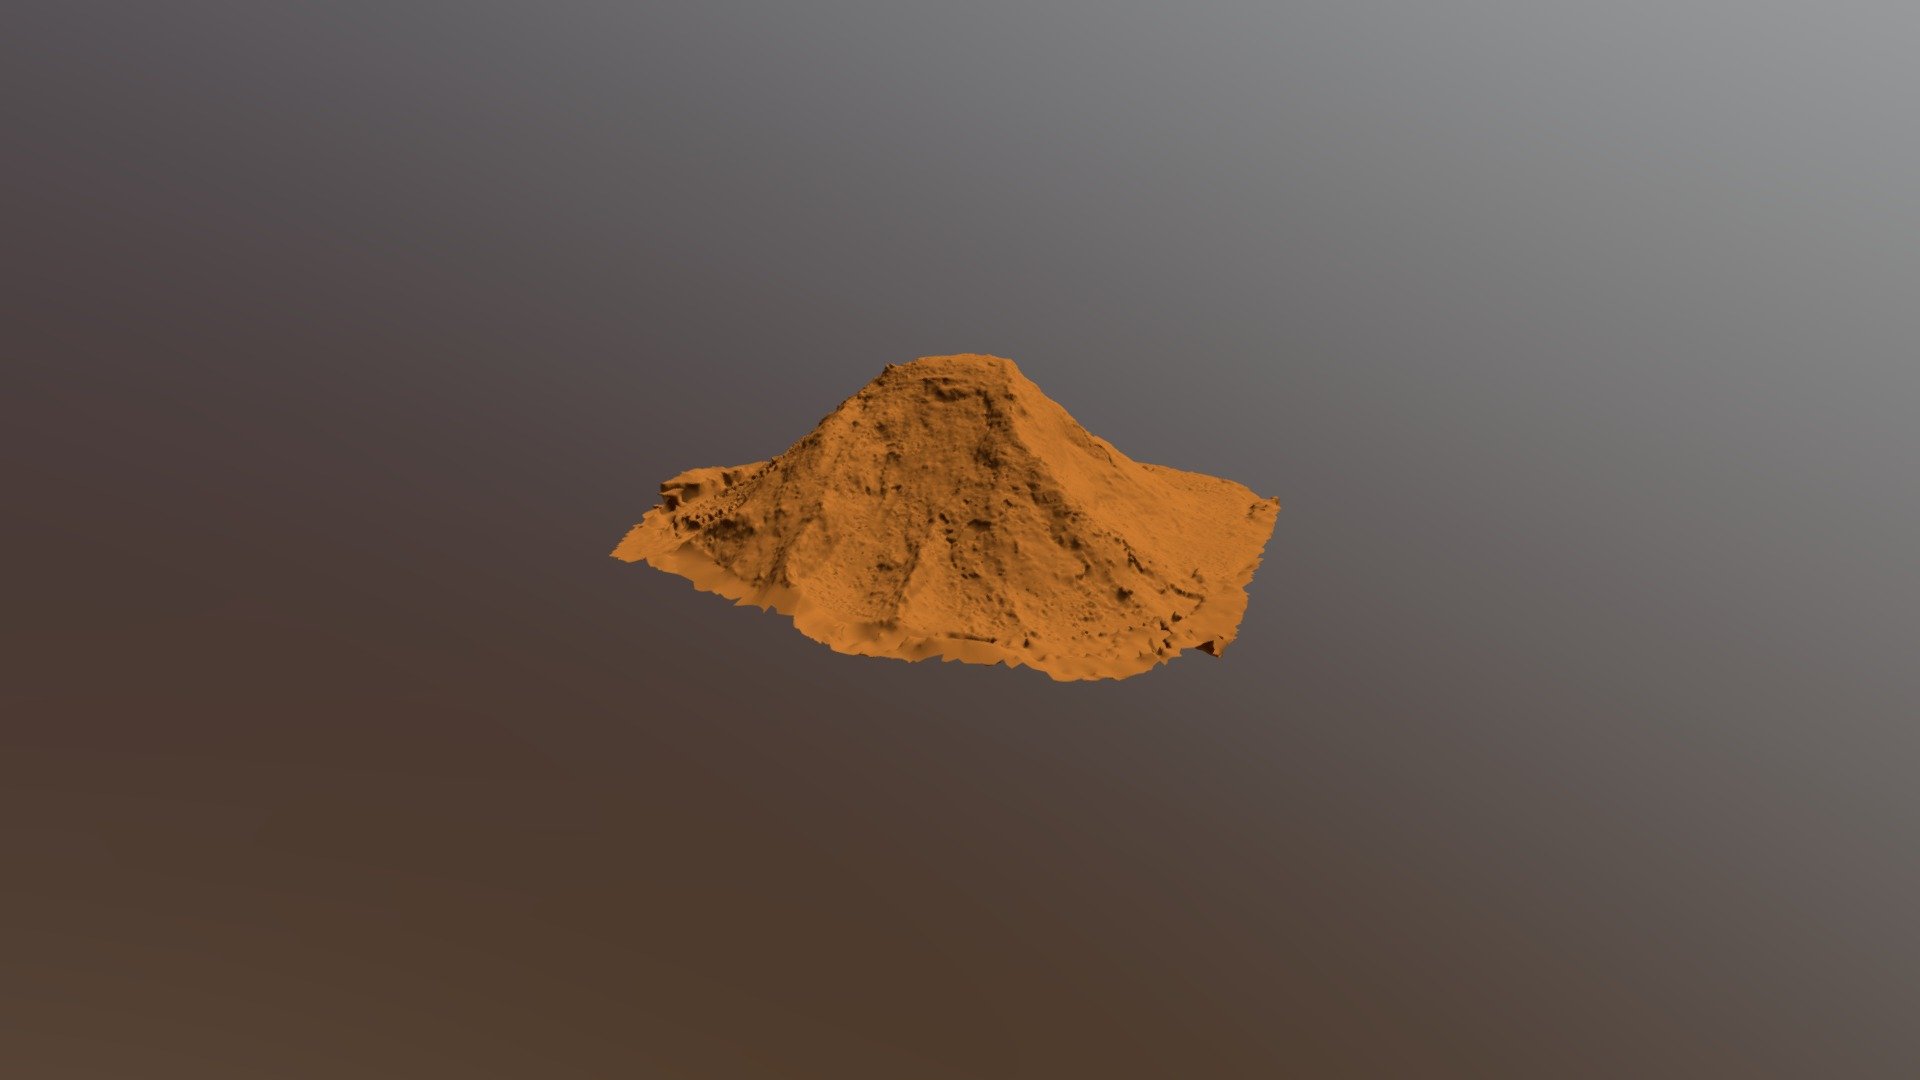 Meshroom 2019.1, reduced mesh, no texture

The fully textured model can be found here https://sketchfab.com/3d-models/sandpile-textured-79bcd682f0bd43faab414b1f45ab3a07 - Sand hill - Download Free 3D model by simfris 3d model